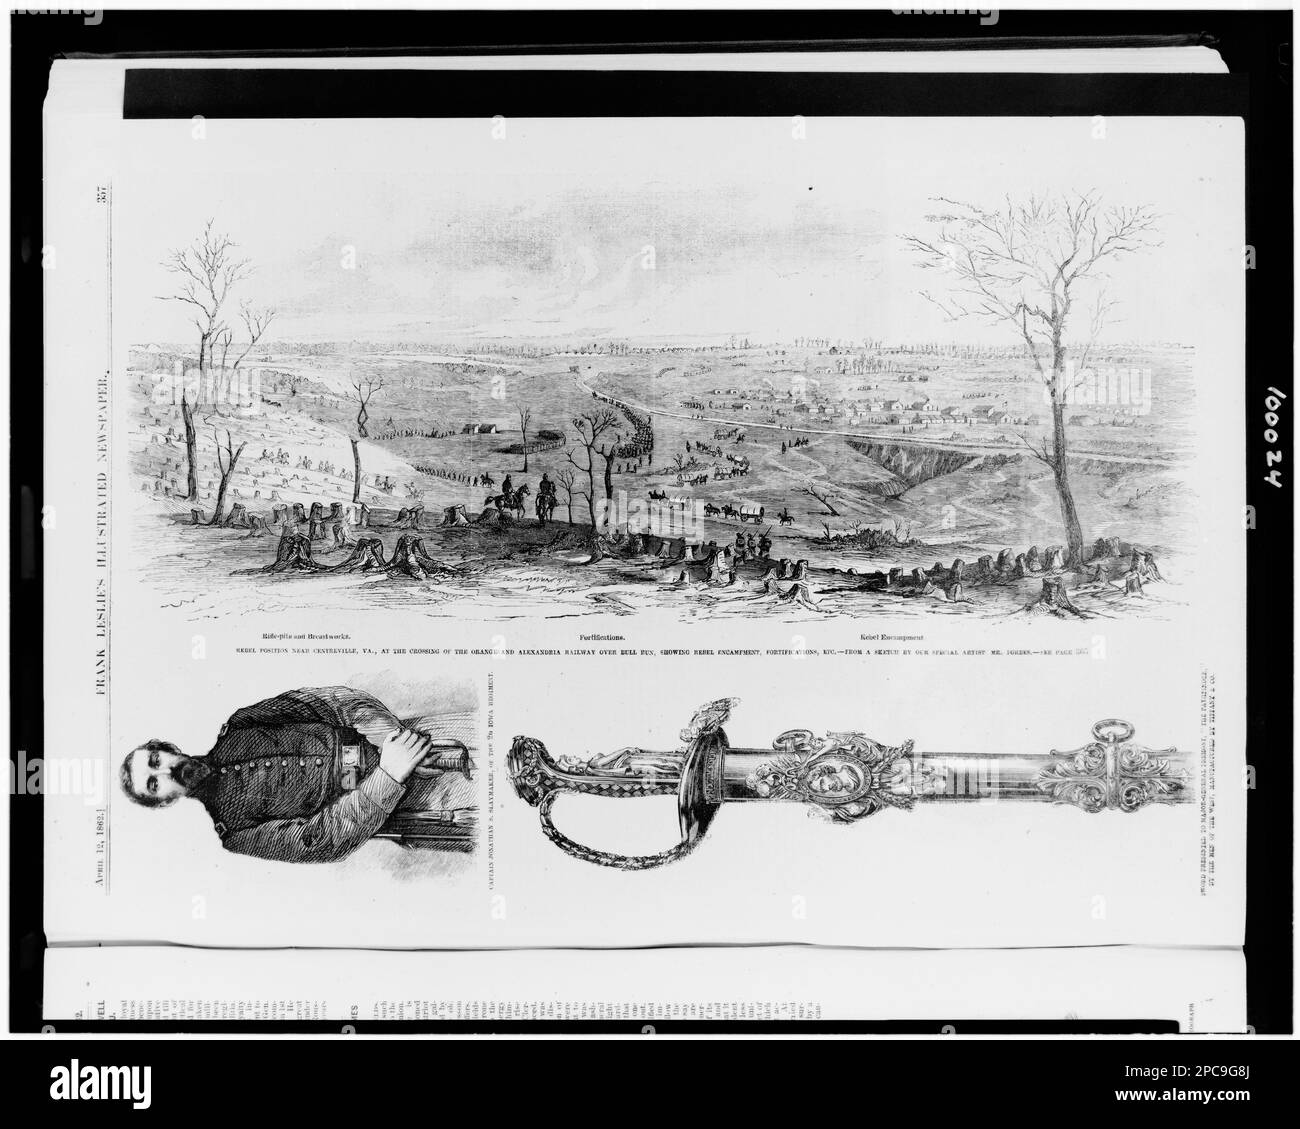 Rebel position near Centreville, Virginia, at the crossing of the Orange and Alexandria Railway over Bull Run, showing rebel encampment, fortifications, etc. / from a sketch by our special artist Mr. Forbes. Captain Jonathan S. Slaymaker, of the 2d Iowa regiment ... Sword presented to Major-General Fremont, 'the pathfinder,' by the men of the West, manufactured by Tiffany & Co.. Illus. in: Frank Leslie's illustrated newspaper, 1862 April 12, p. 357. Slaymaker, Jonathan S, Military service, Frémont, John Charles, 1813-1890, Associated objects, Military facilities, Virginia, Centreville, 1860-18 Stock Photo